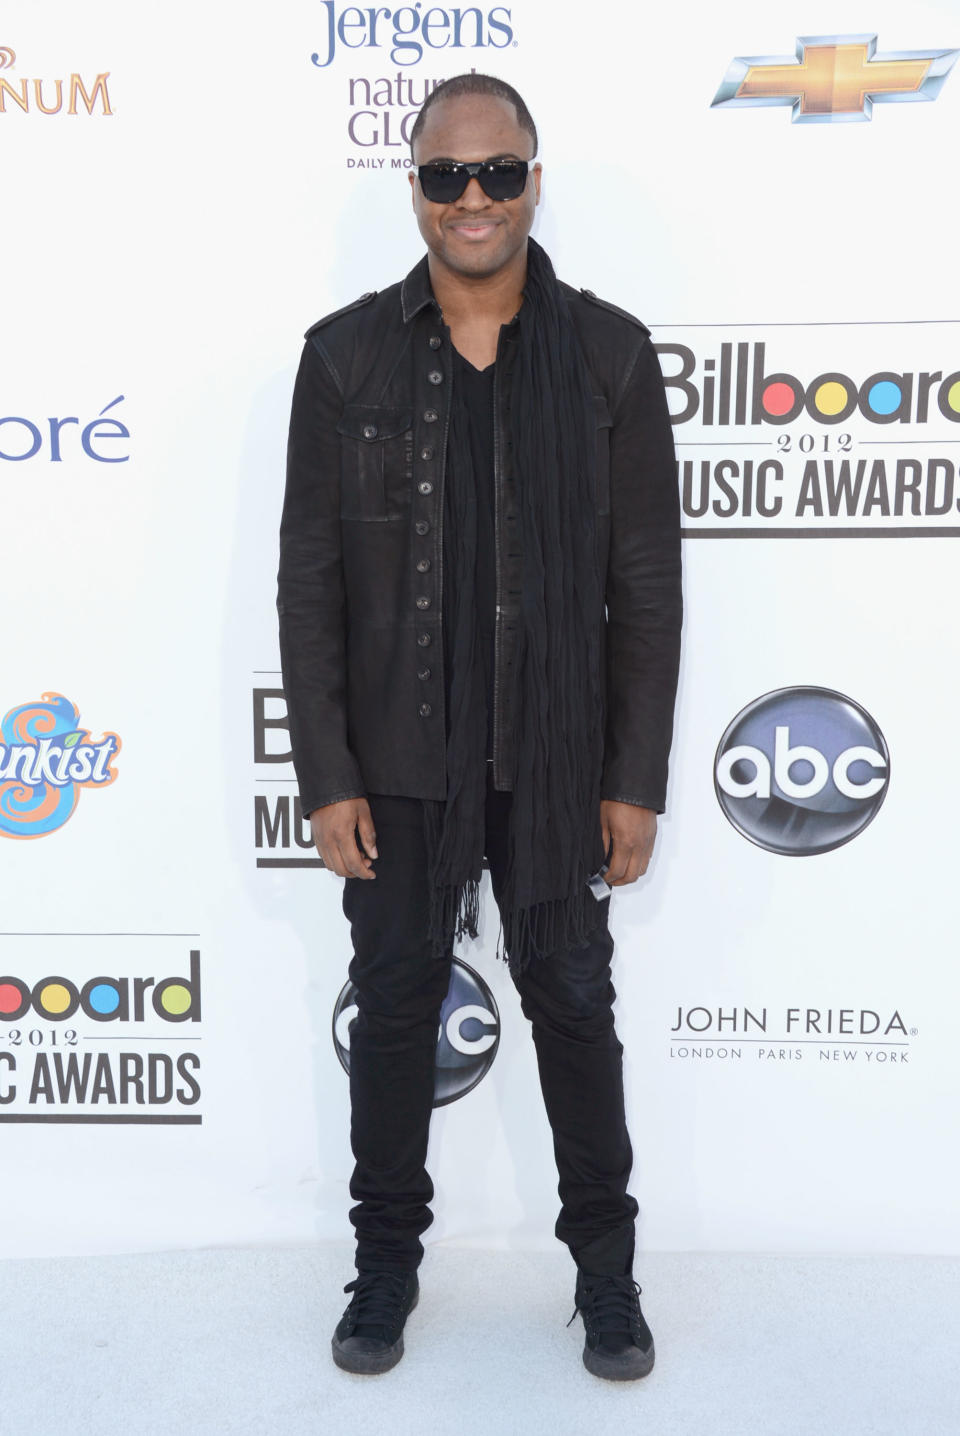 LAS VEGAS, NV - MAY 20: Singer Taio Cruz arrives at the 2012 Billboard Music Awards held at the MGM Grand Garden Arena on May 20, 2012 in Las Vegas, Nevada. (Photo by Frazer Harrison/Getty Images for ABC)